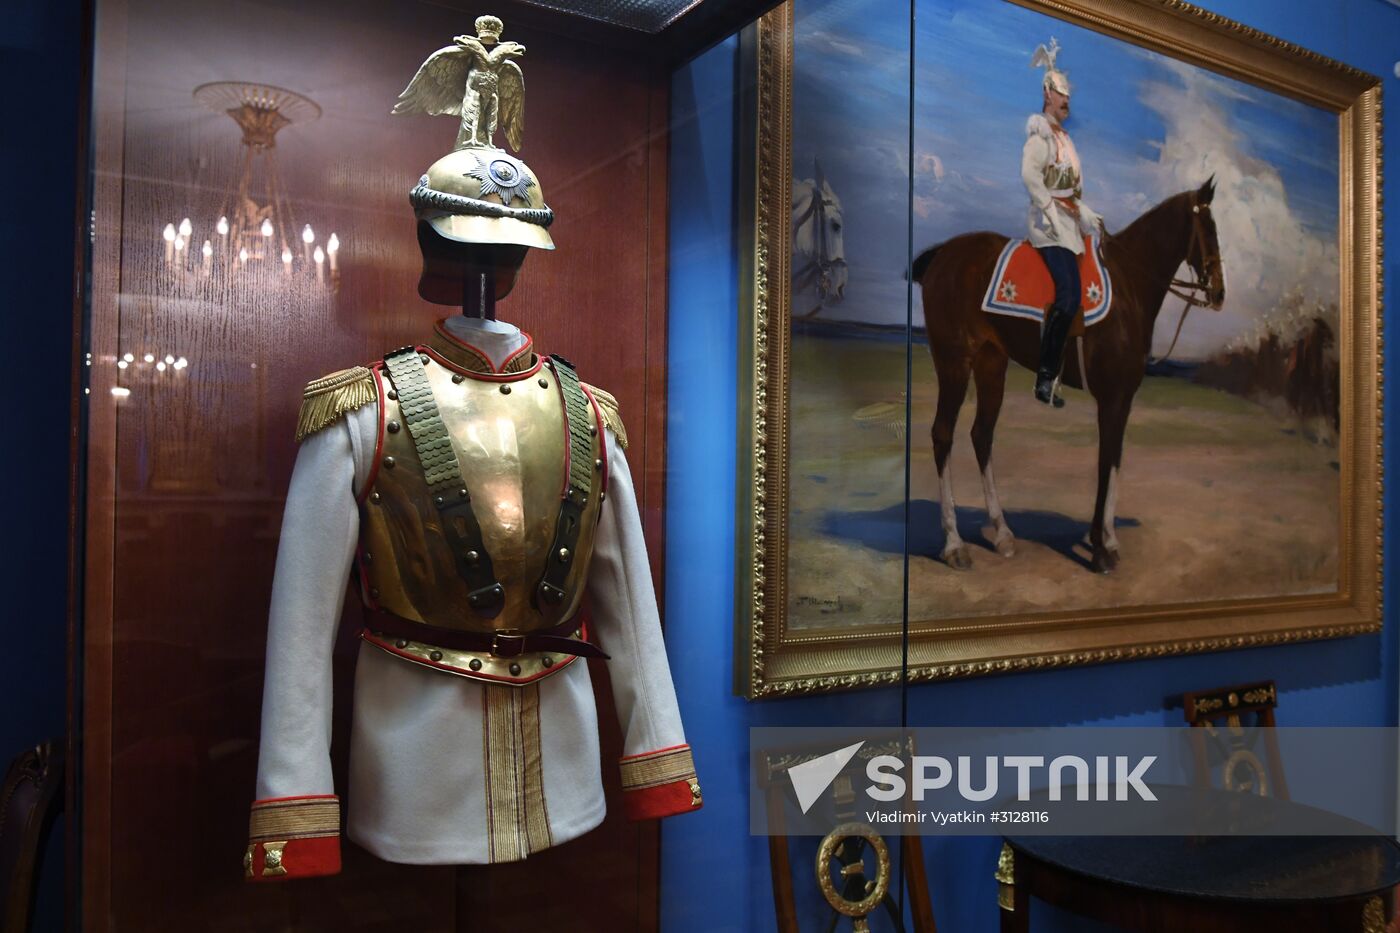 "Museum of Russian Social Classes" exhibition unveiled